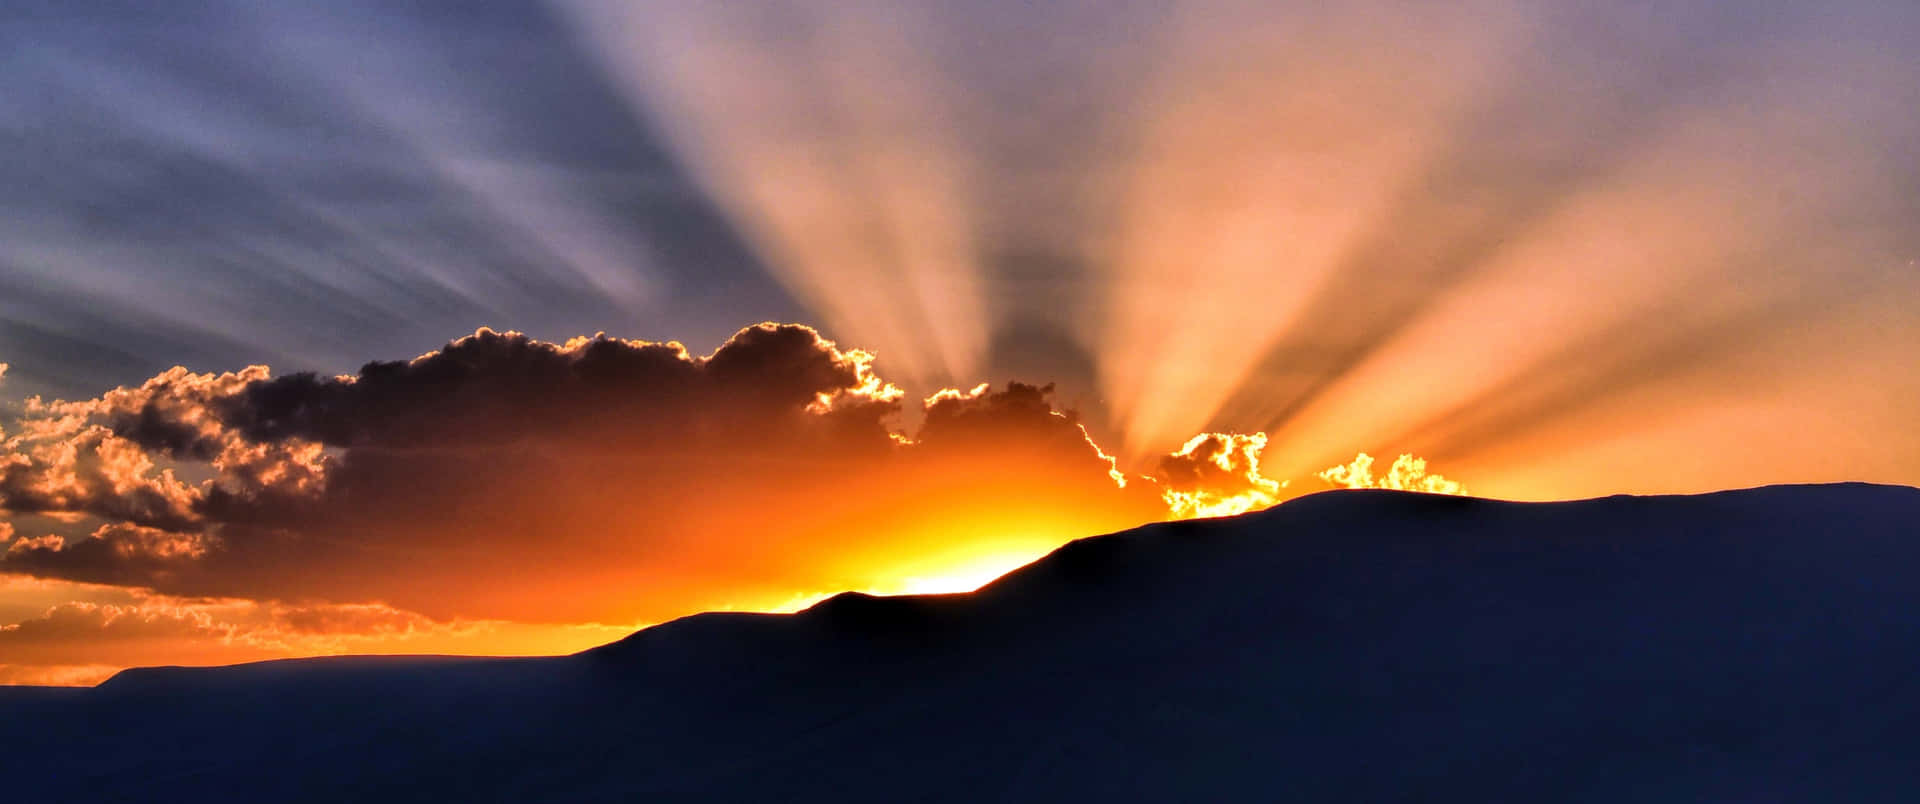 Mountain Landscape With Sun Rays Wallpaper